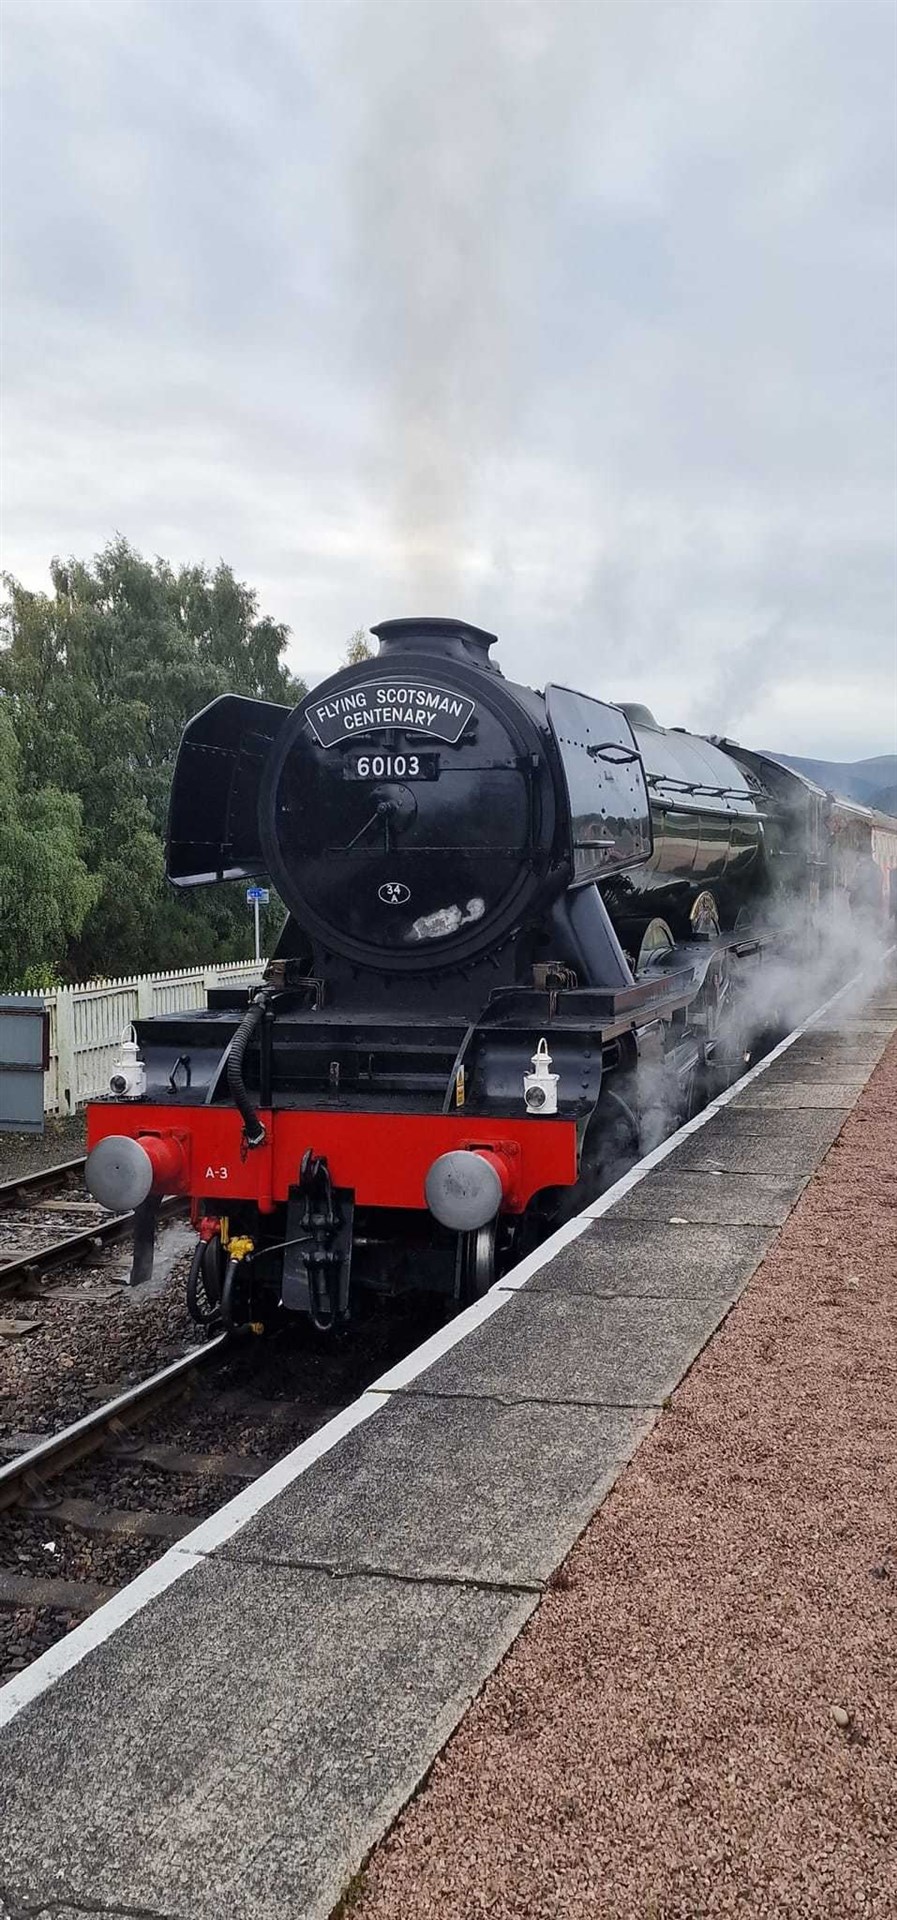 Steaming into Aviemore: the most famous loco in the world